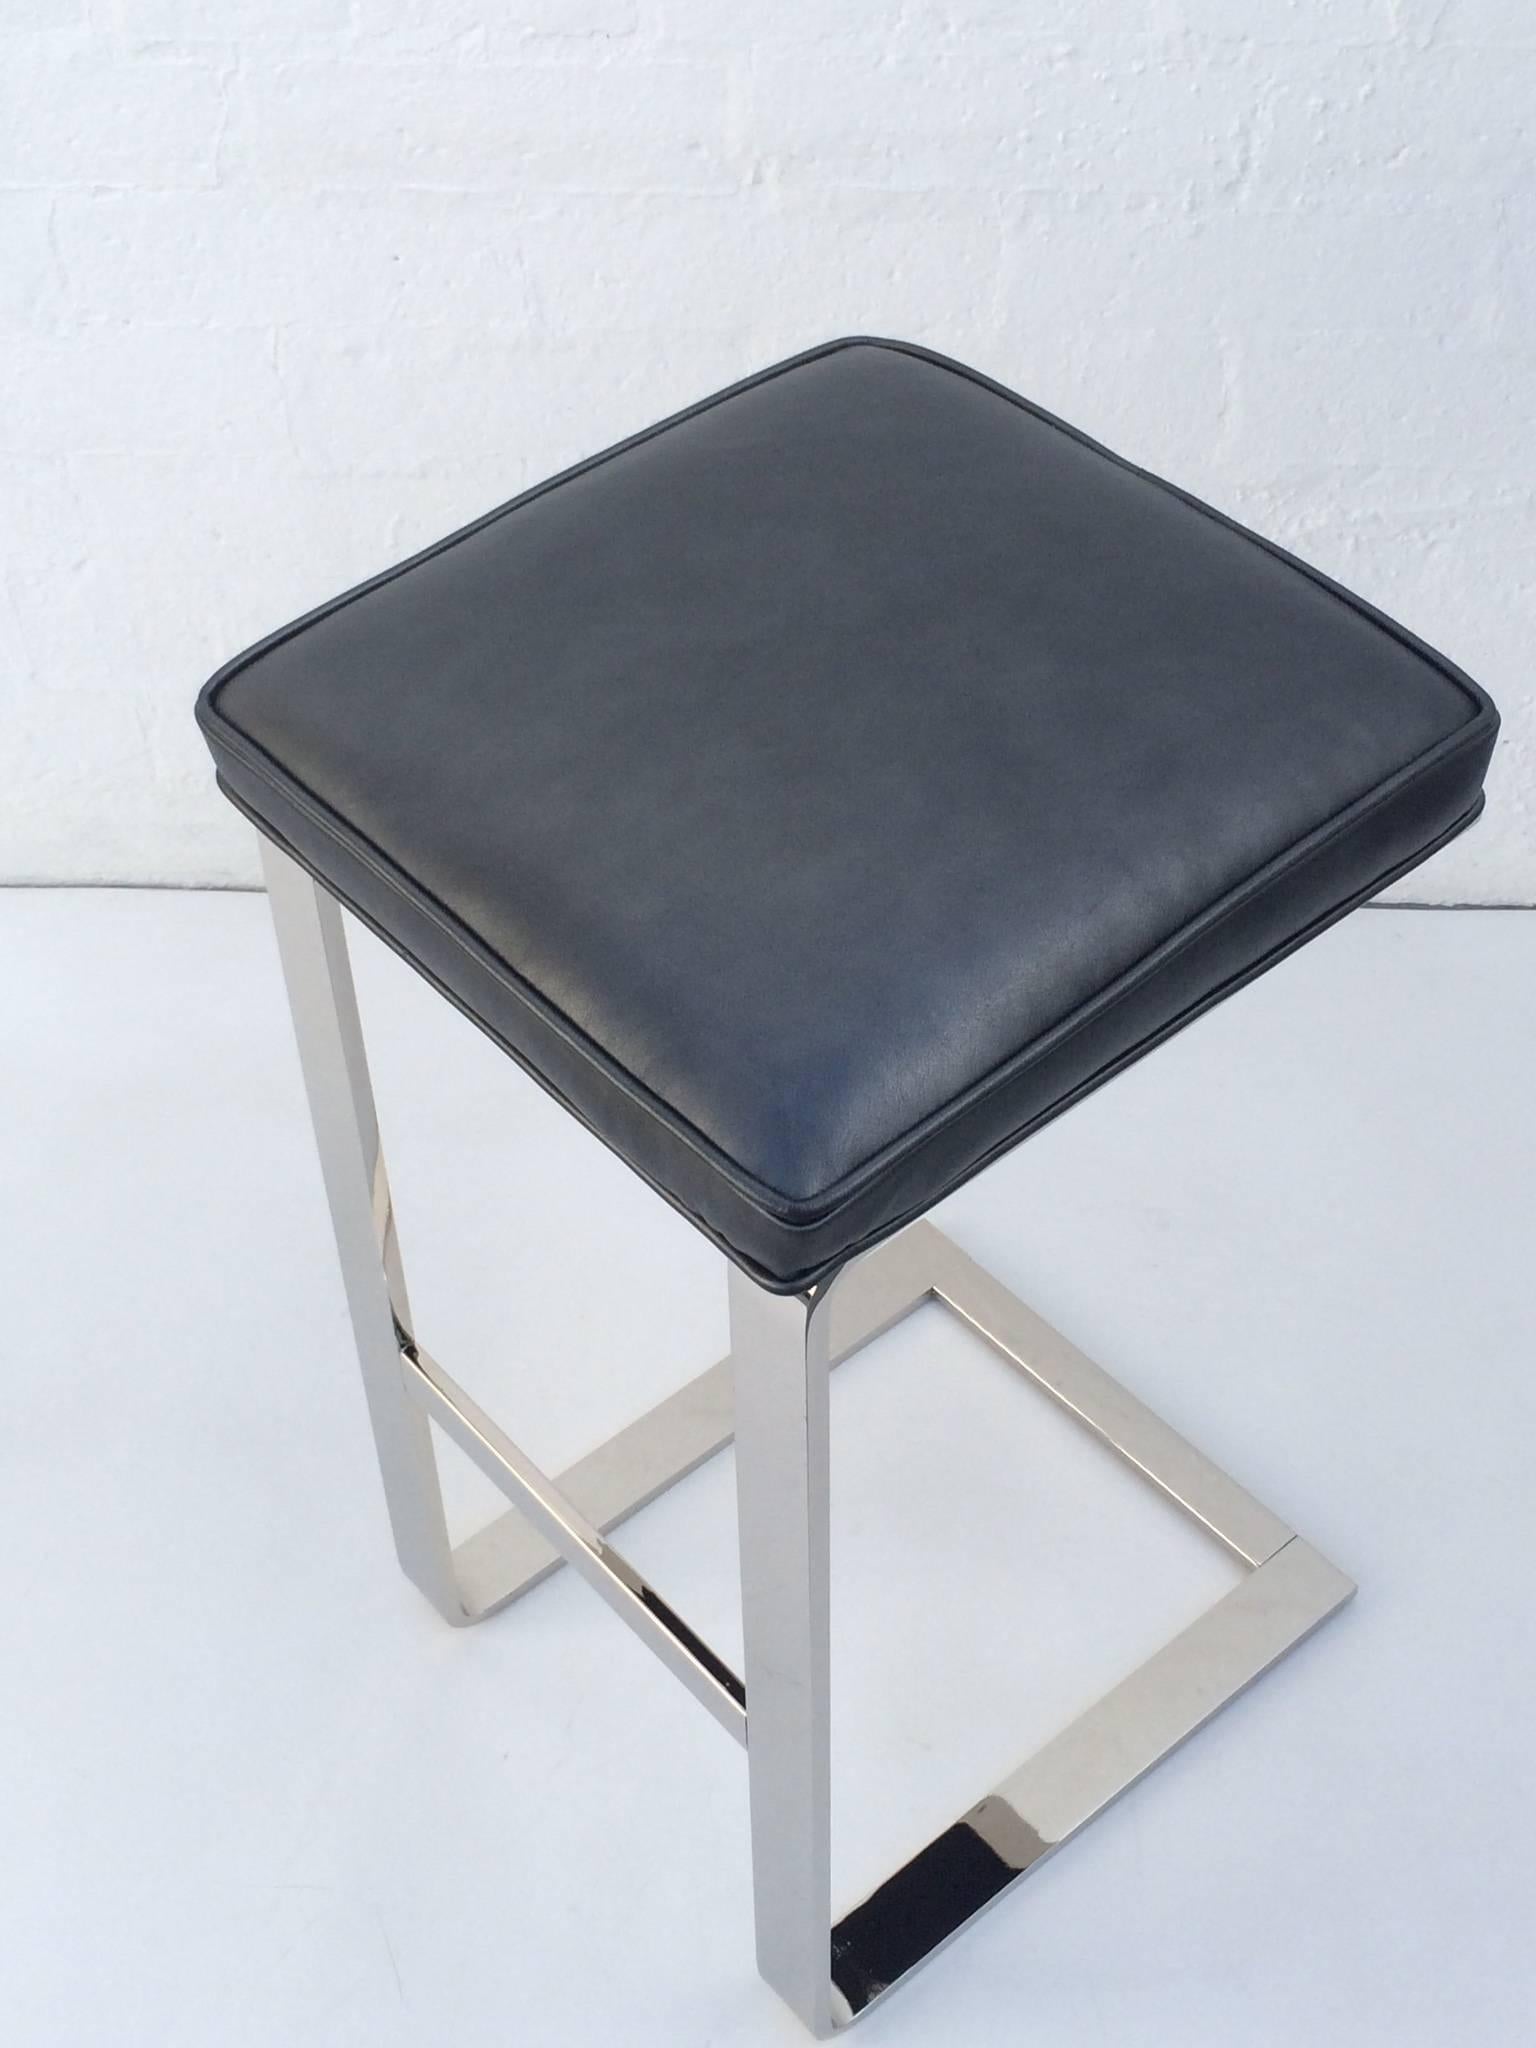 American Pair of Nickel and Leather Barstools by Milo Baughman